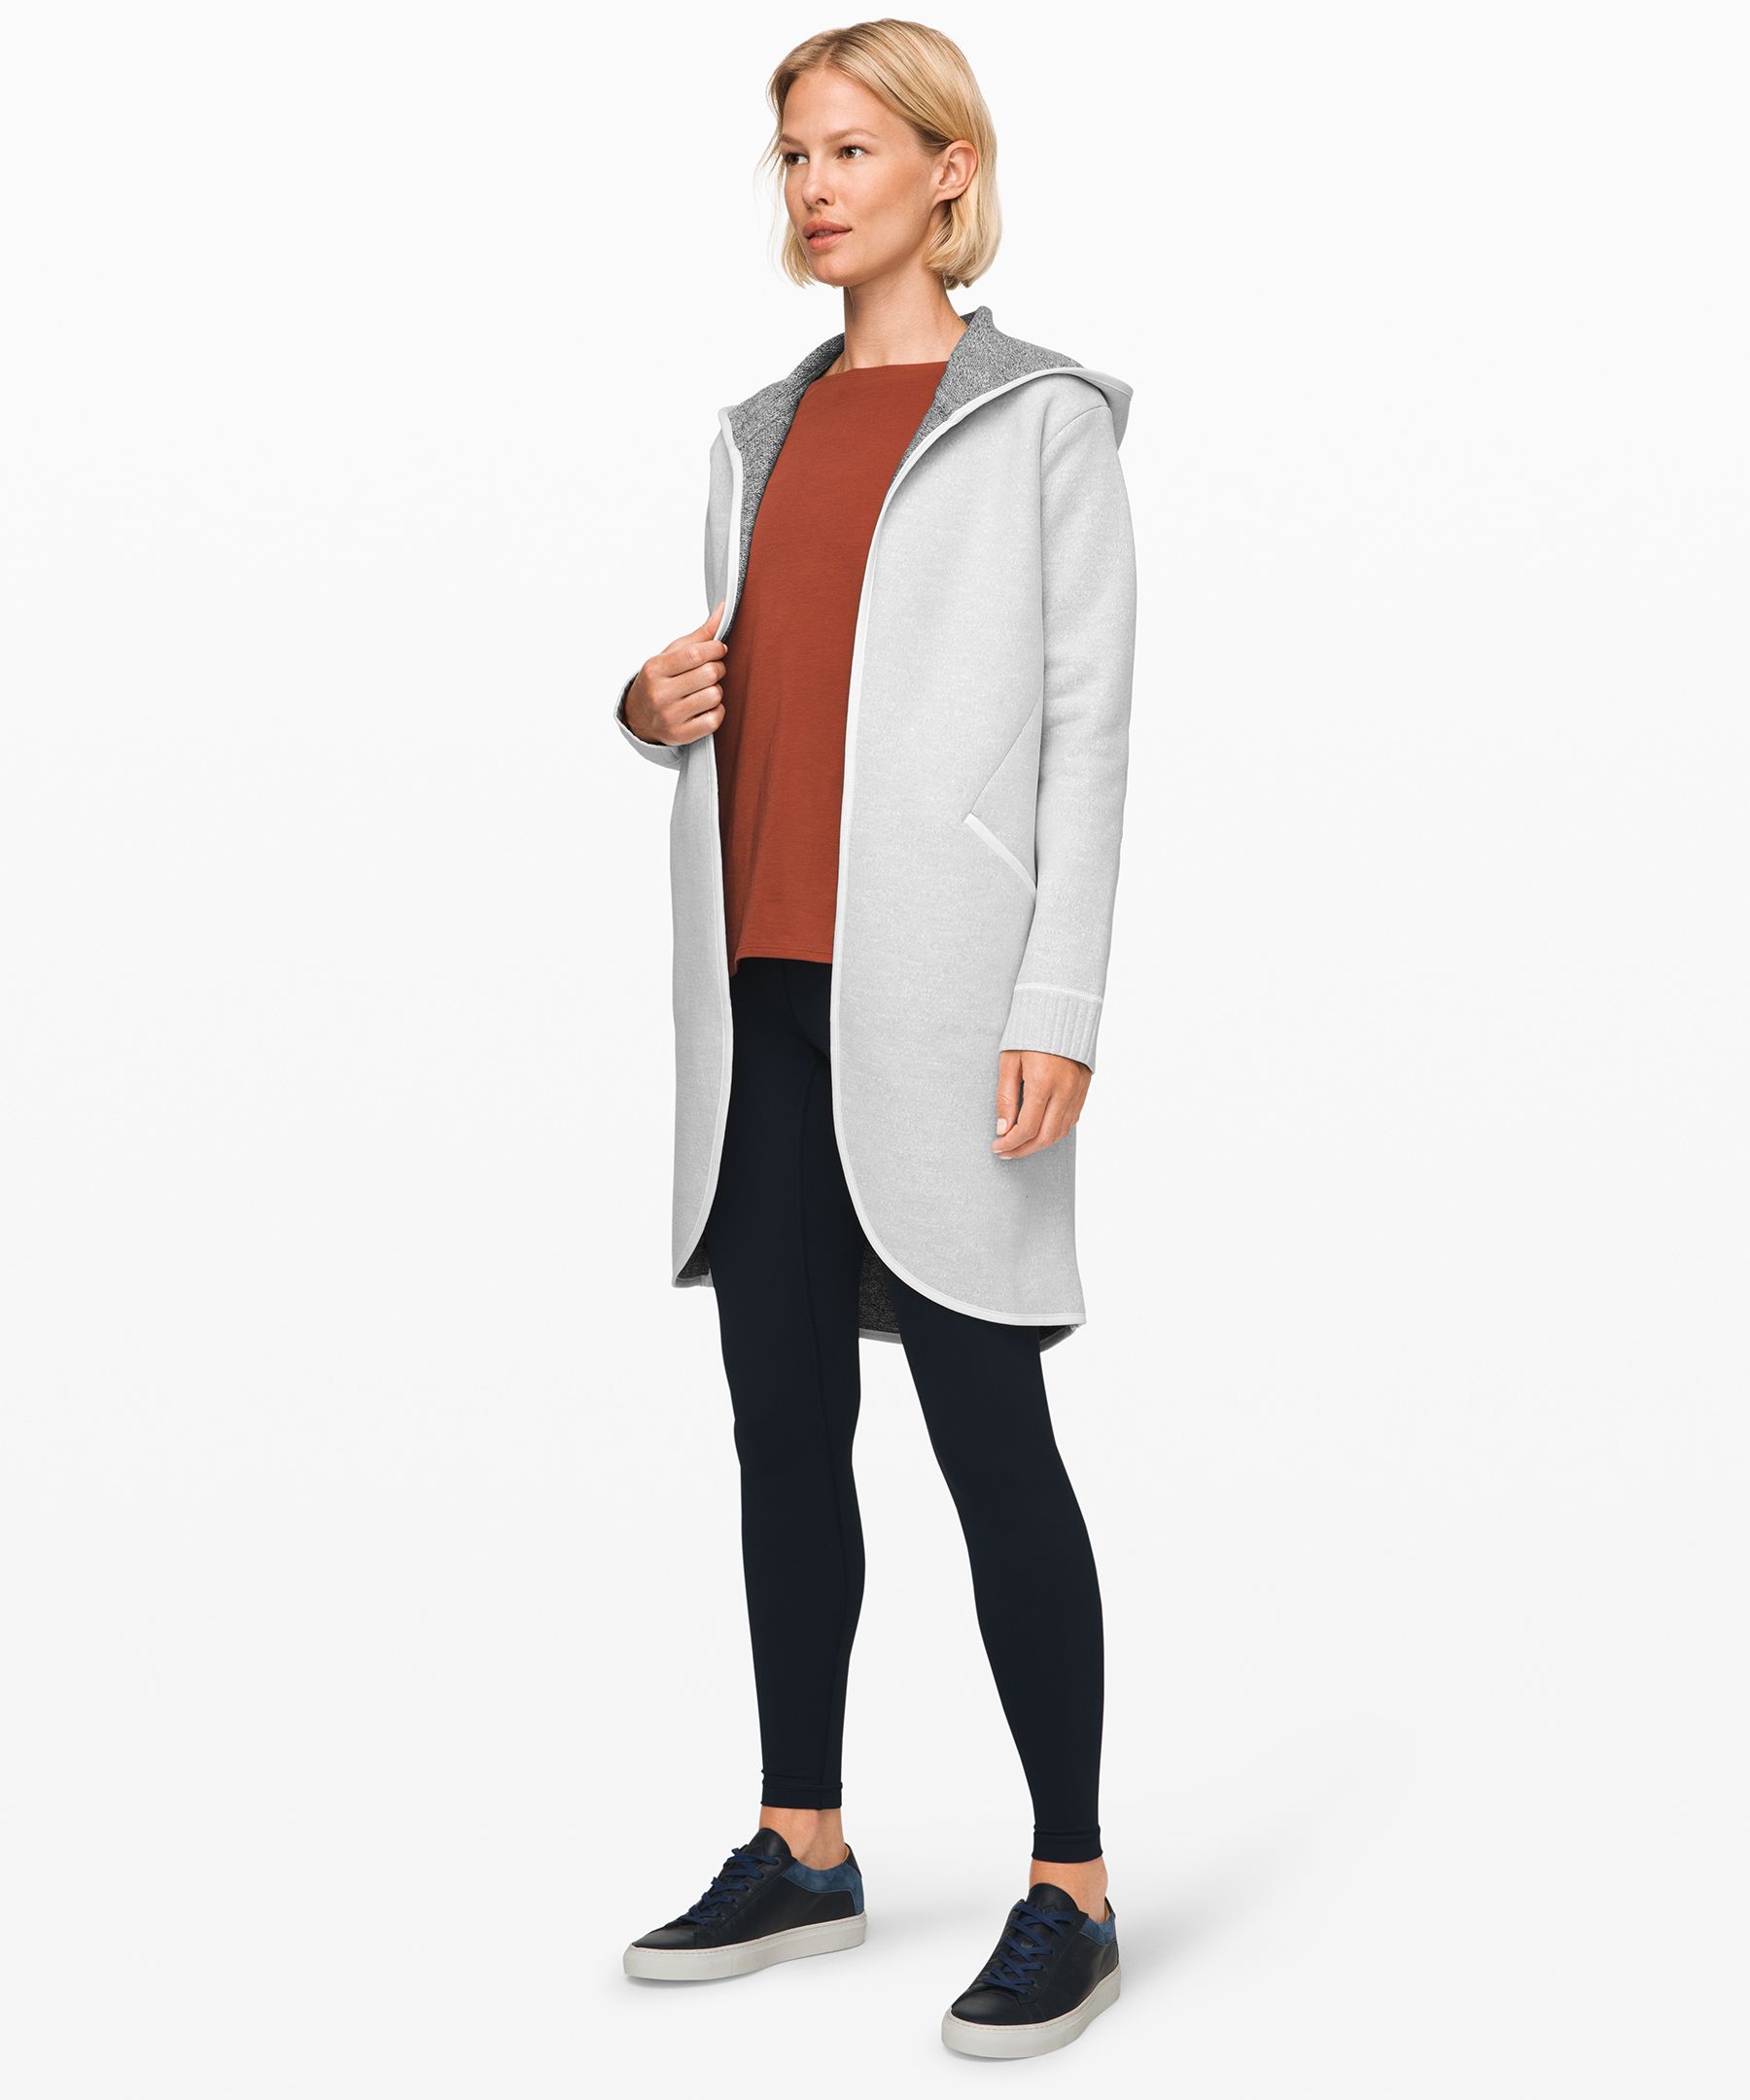 Lululemon All Afternoon Cardigan In Heathered Speckled Black/white